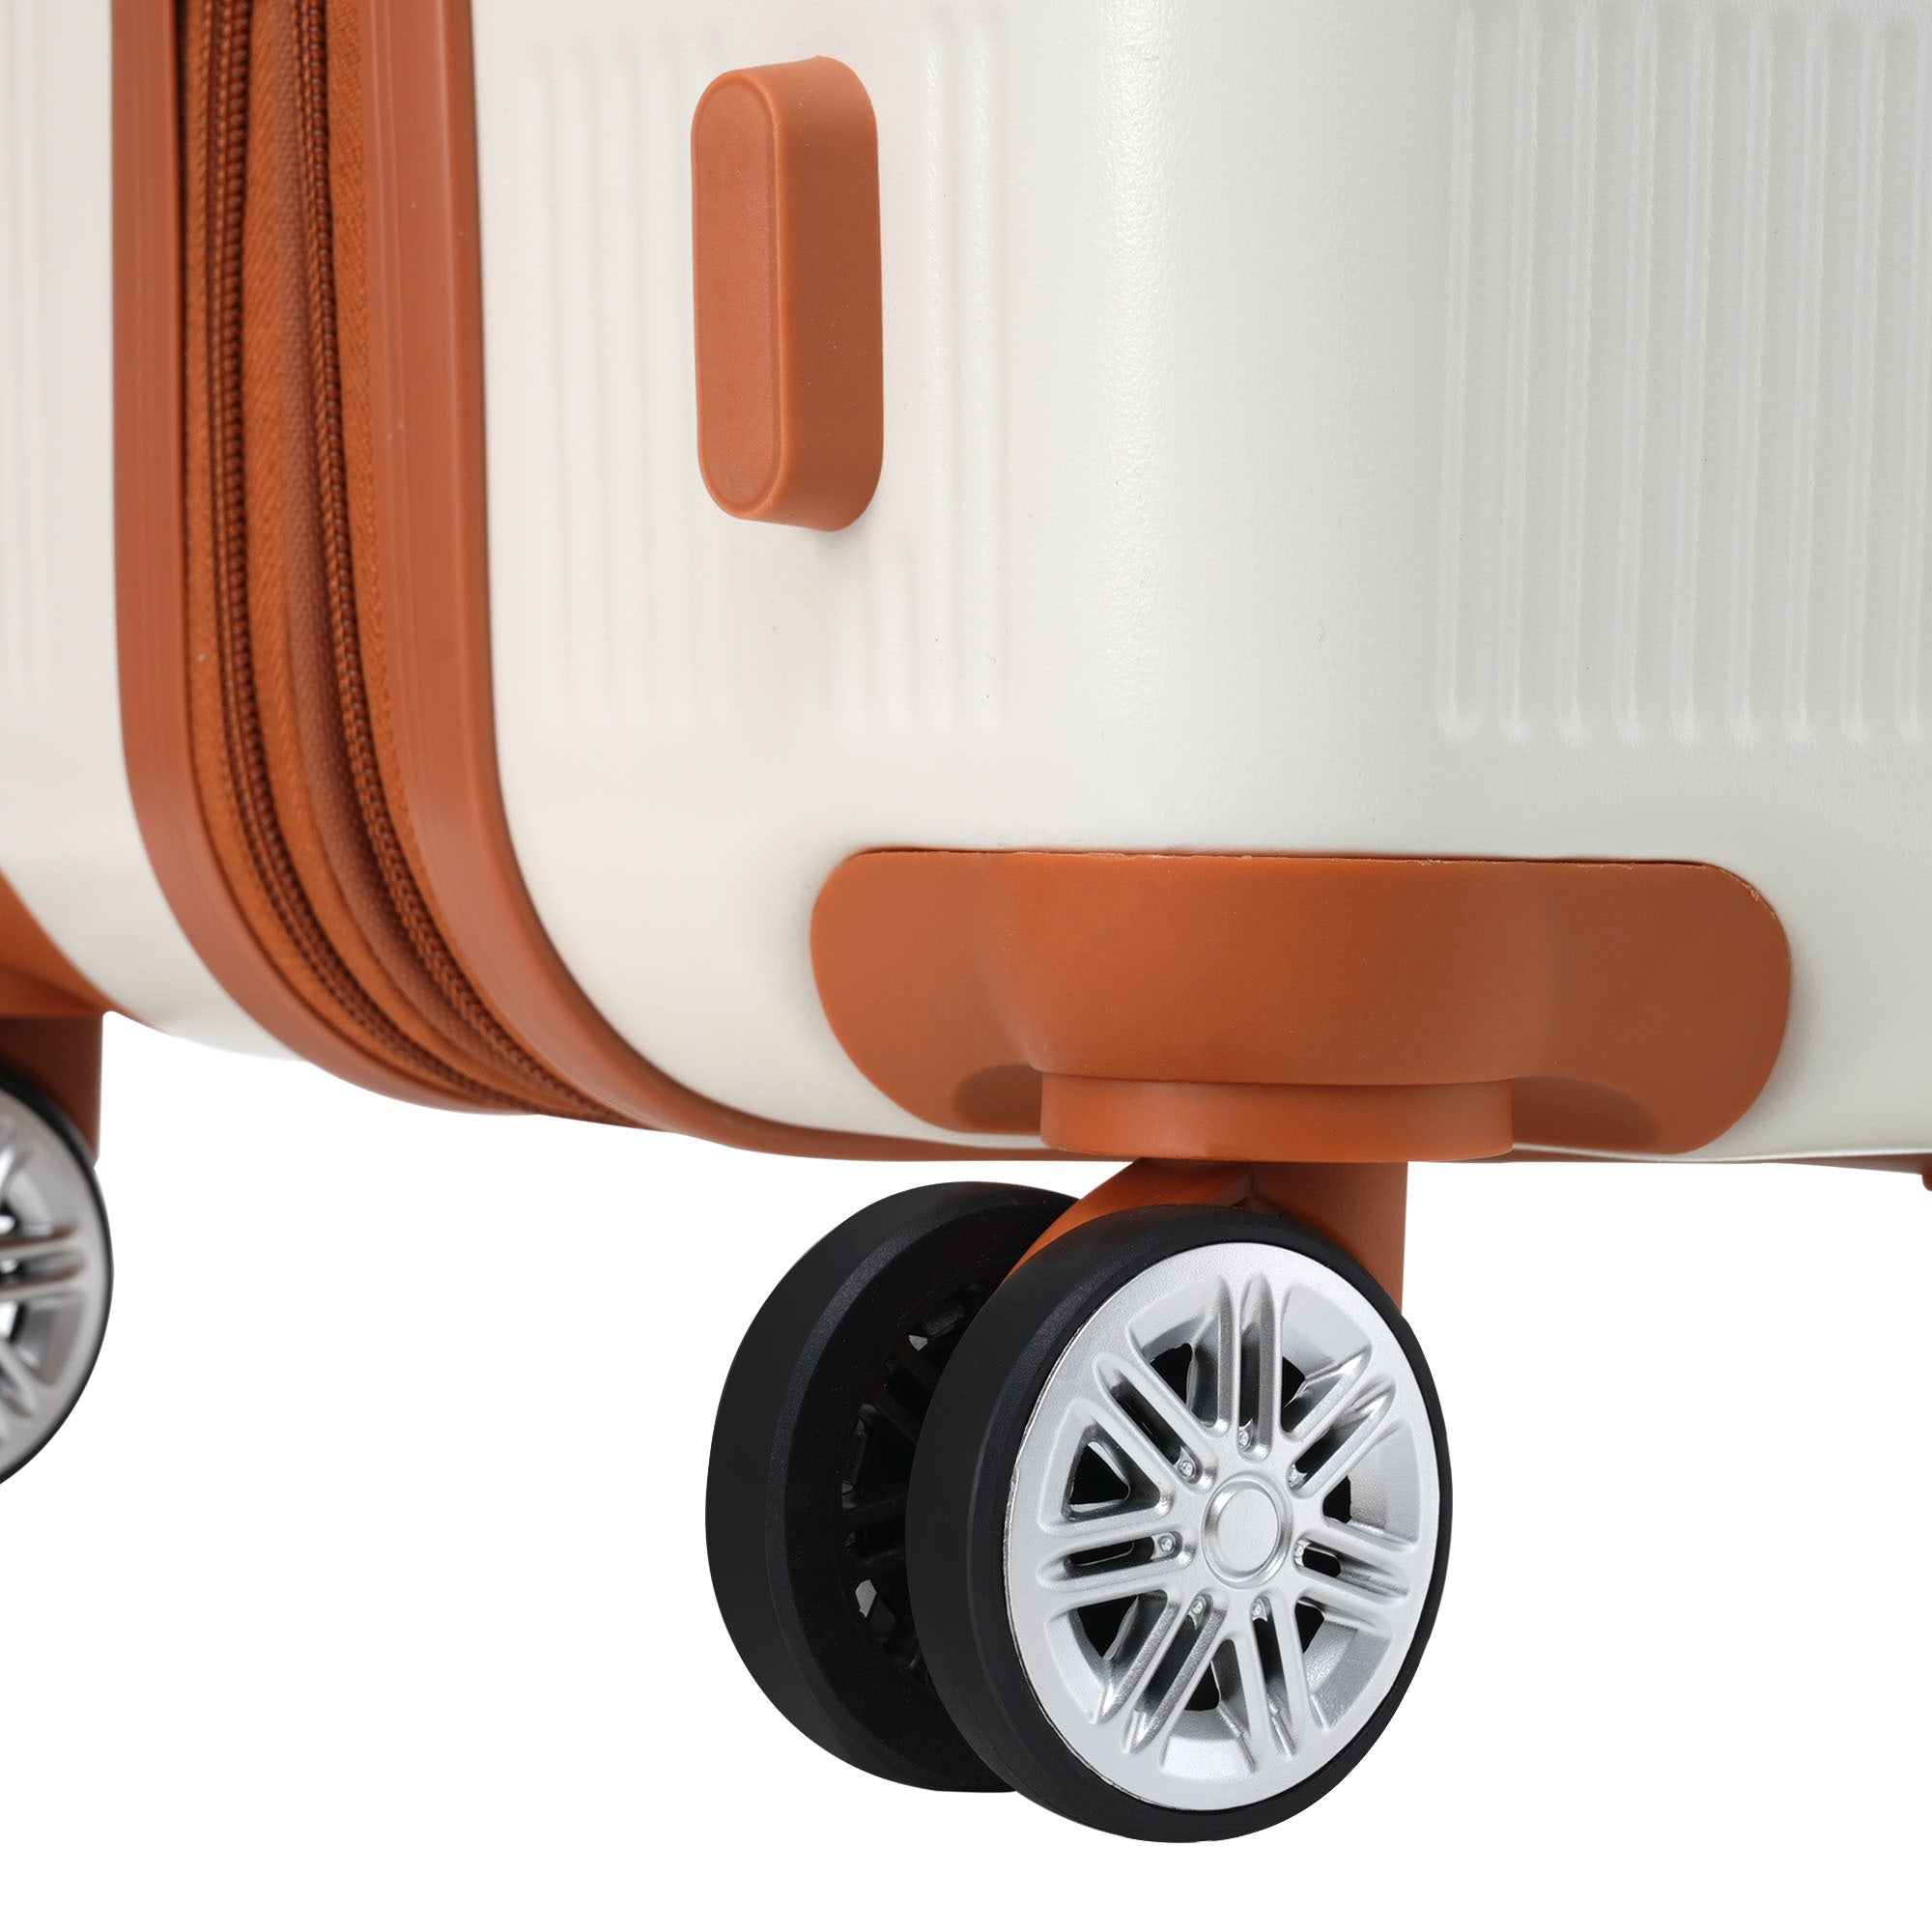 Hardshell Luggage Sets 3 Piece double spinner 8 wheels white-abs